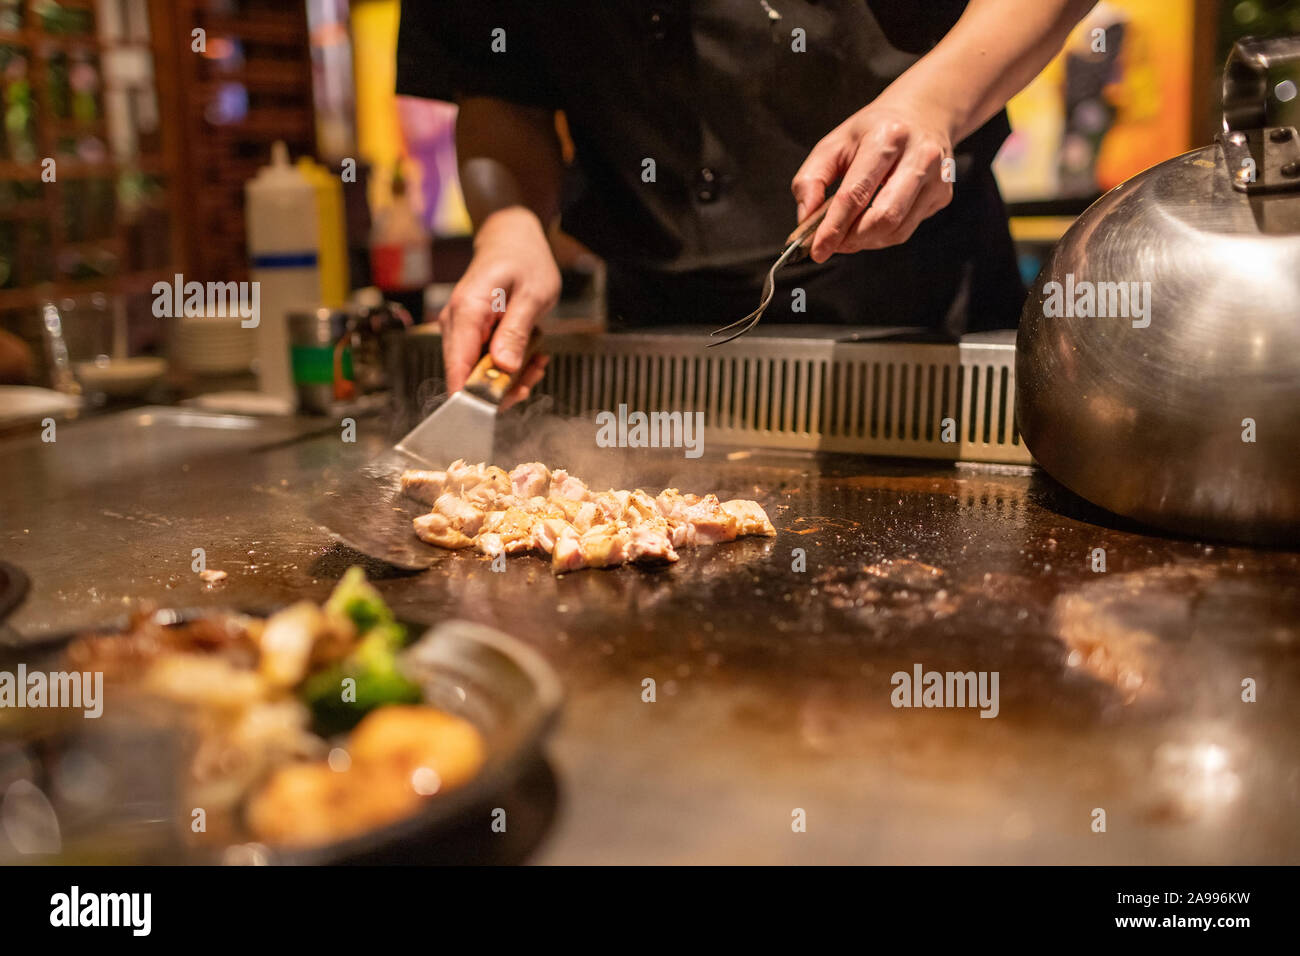 Teppanyaki Grill High Resolution Stock Photography and Images - Alamy